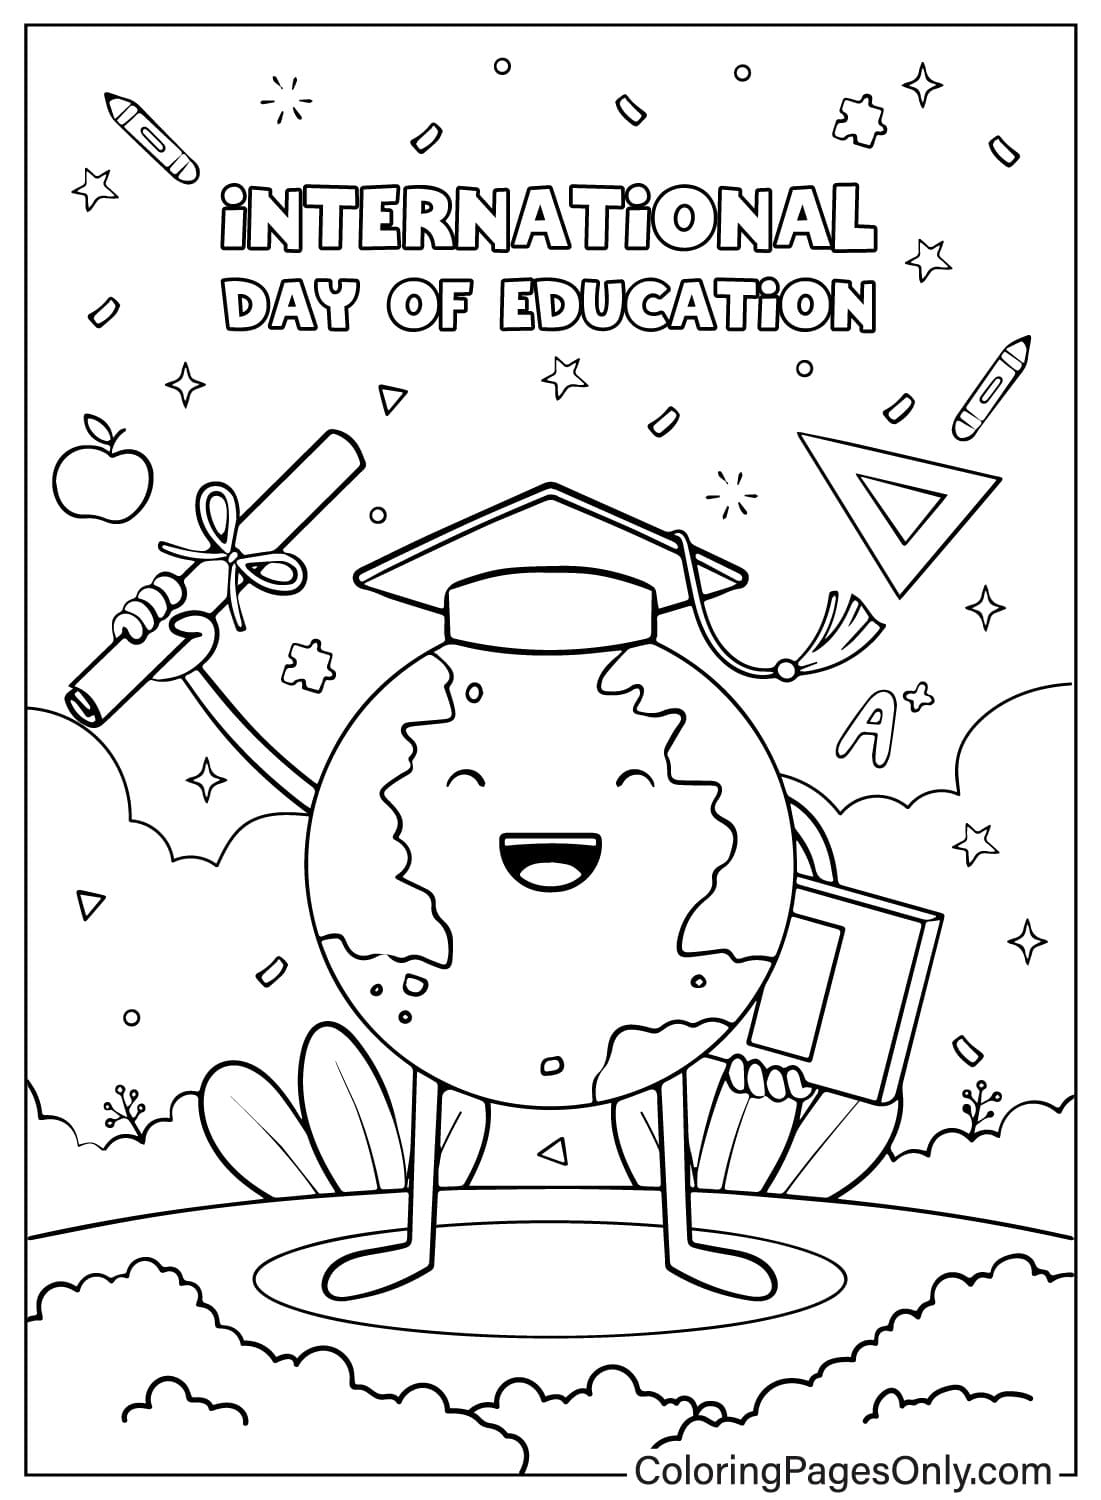 Drawing International Day of Education Coloring Page from International Day of Education